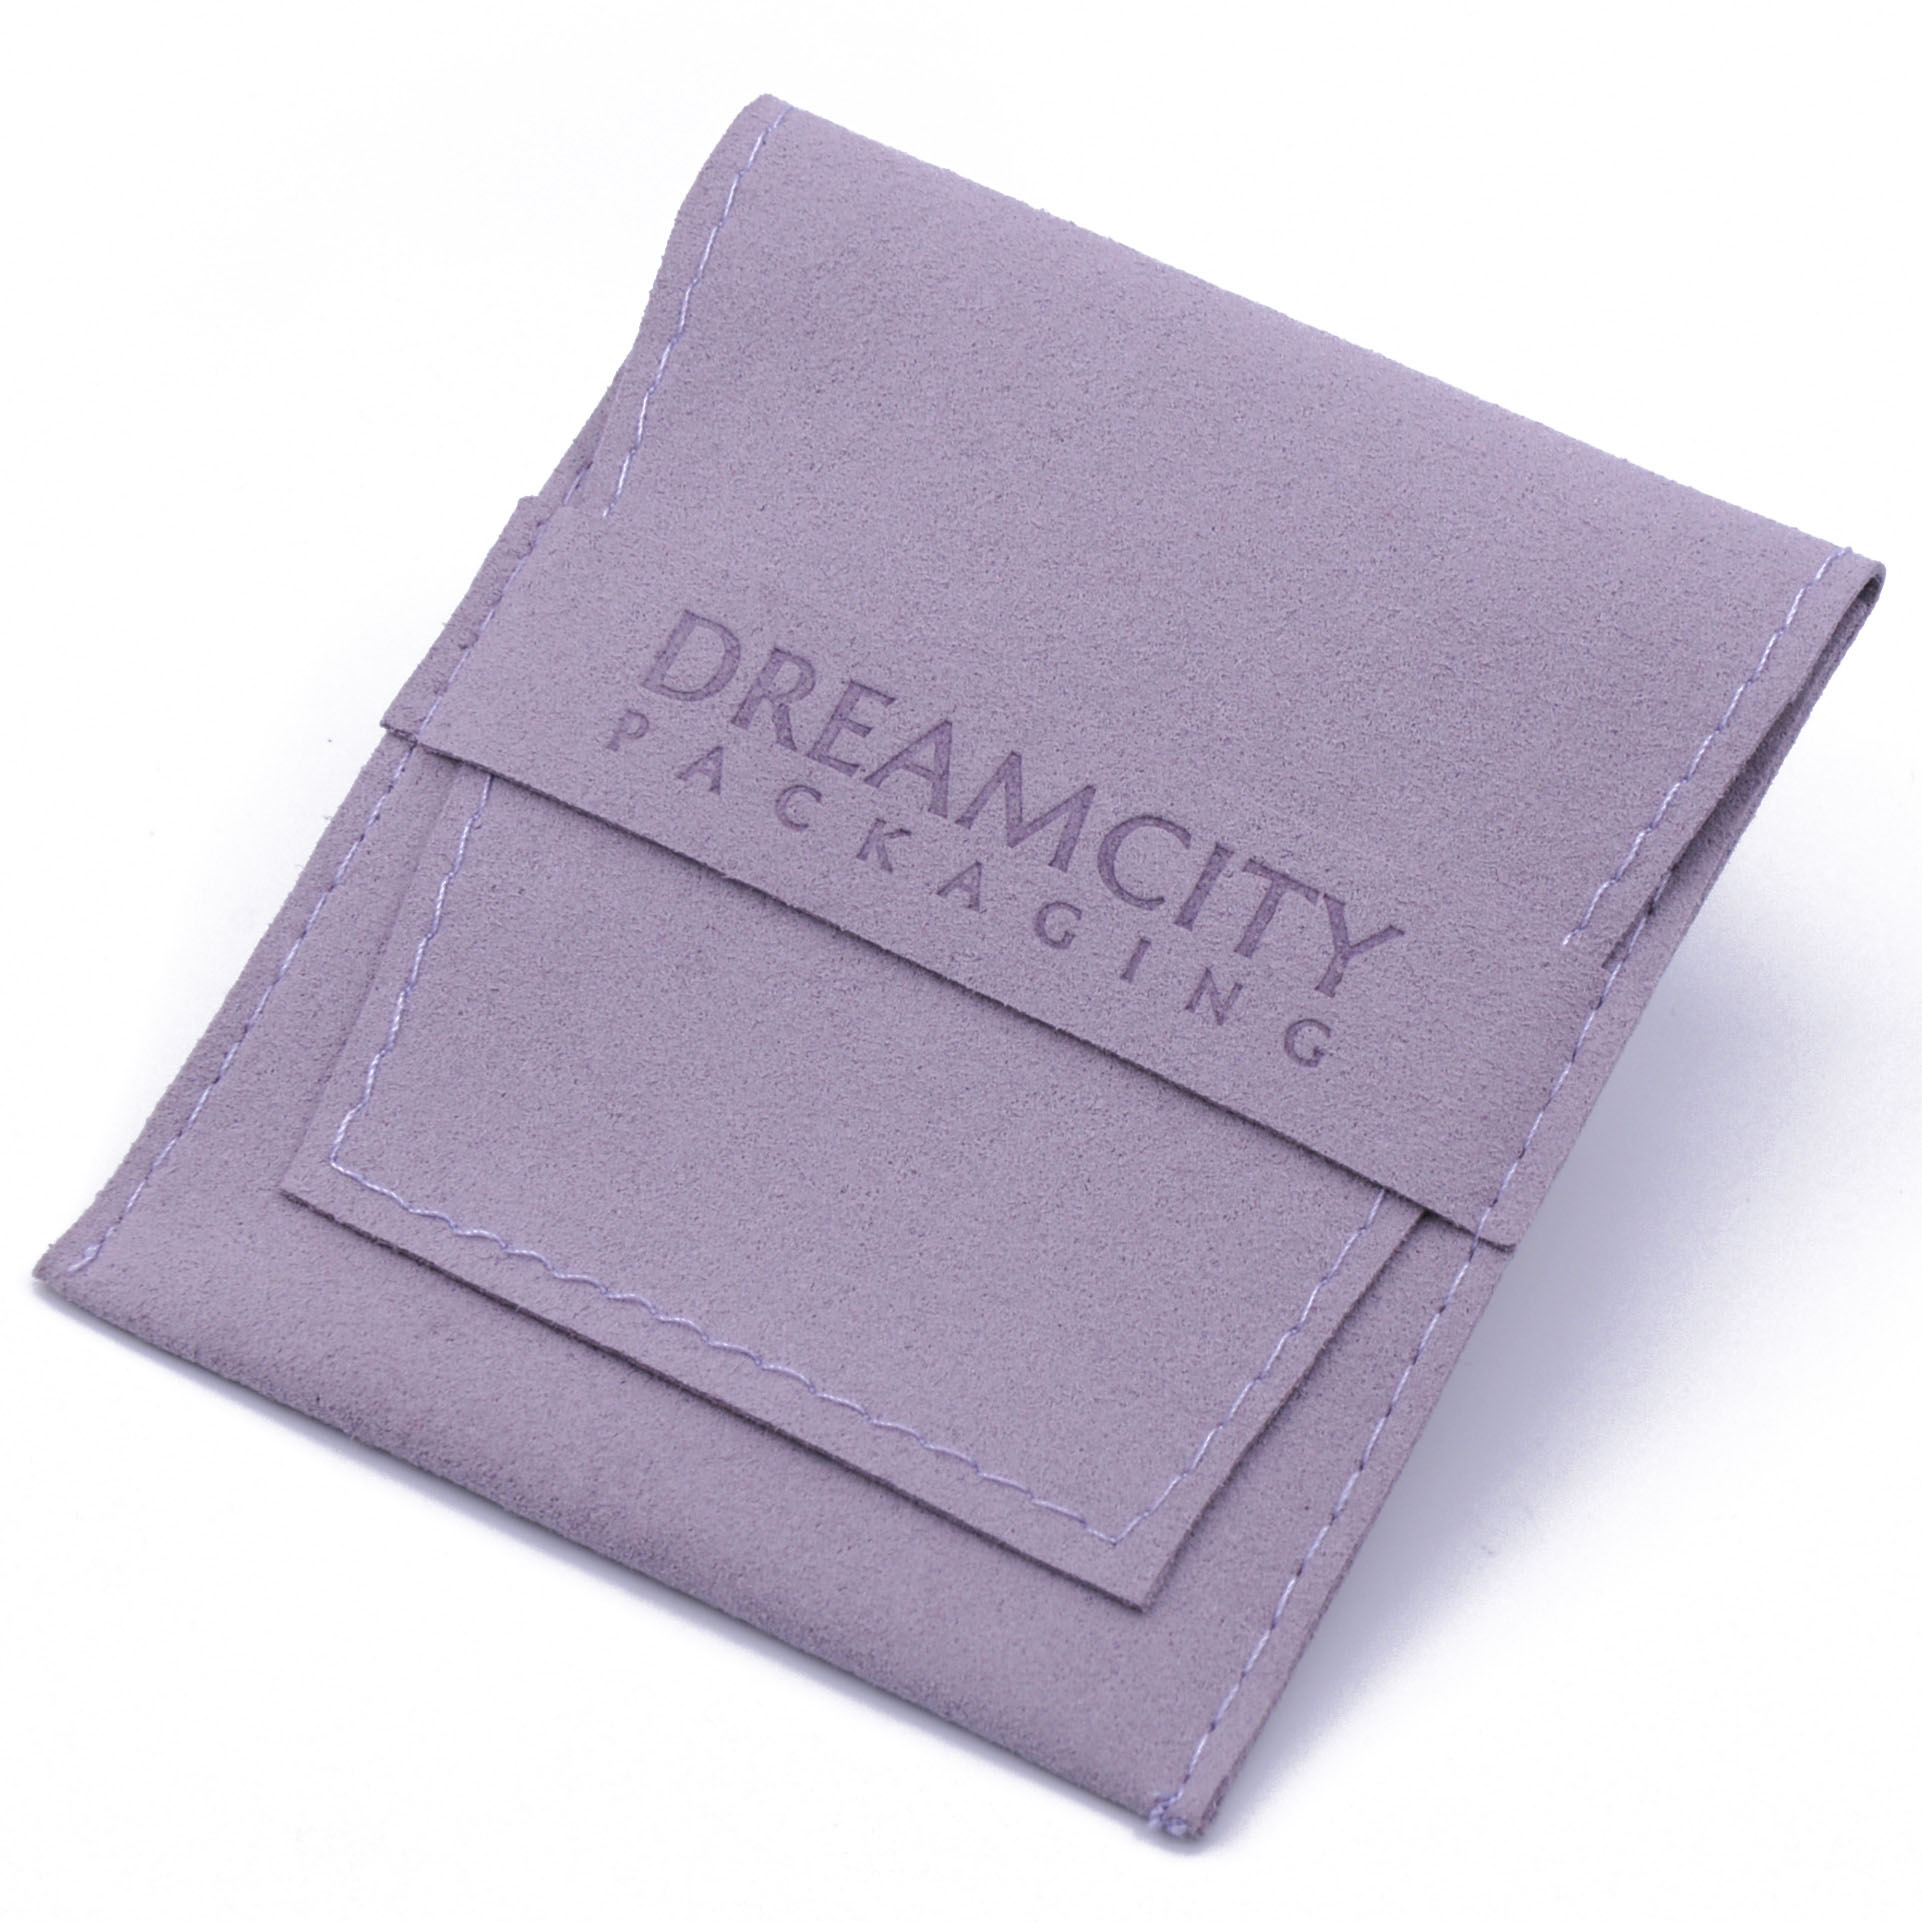 50pcs Custom Jewelry Pouch Personalized Deboss Bag Chic Small Jewerly  Packaging Pouch Microfiber Suede Pouch Bag 